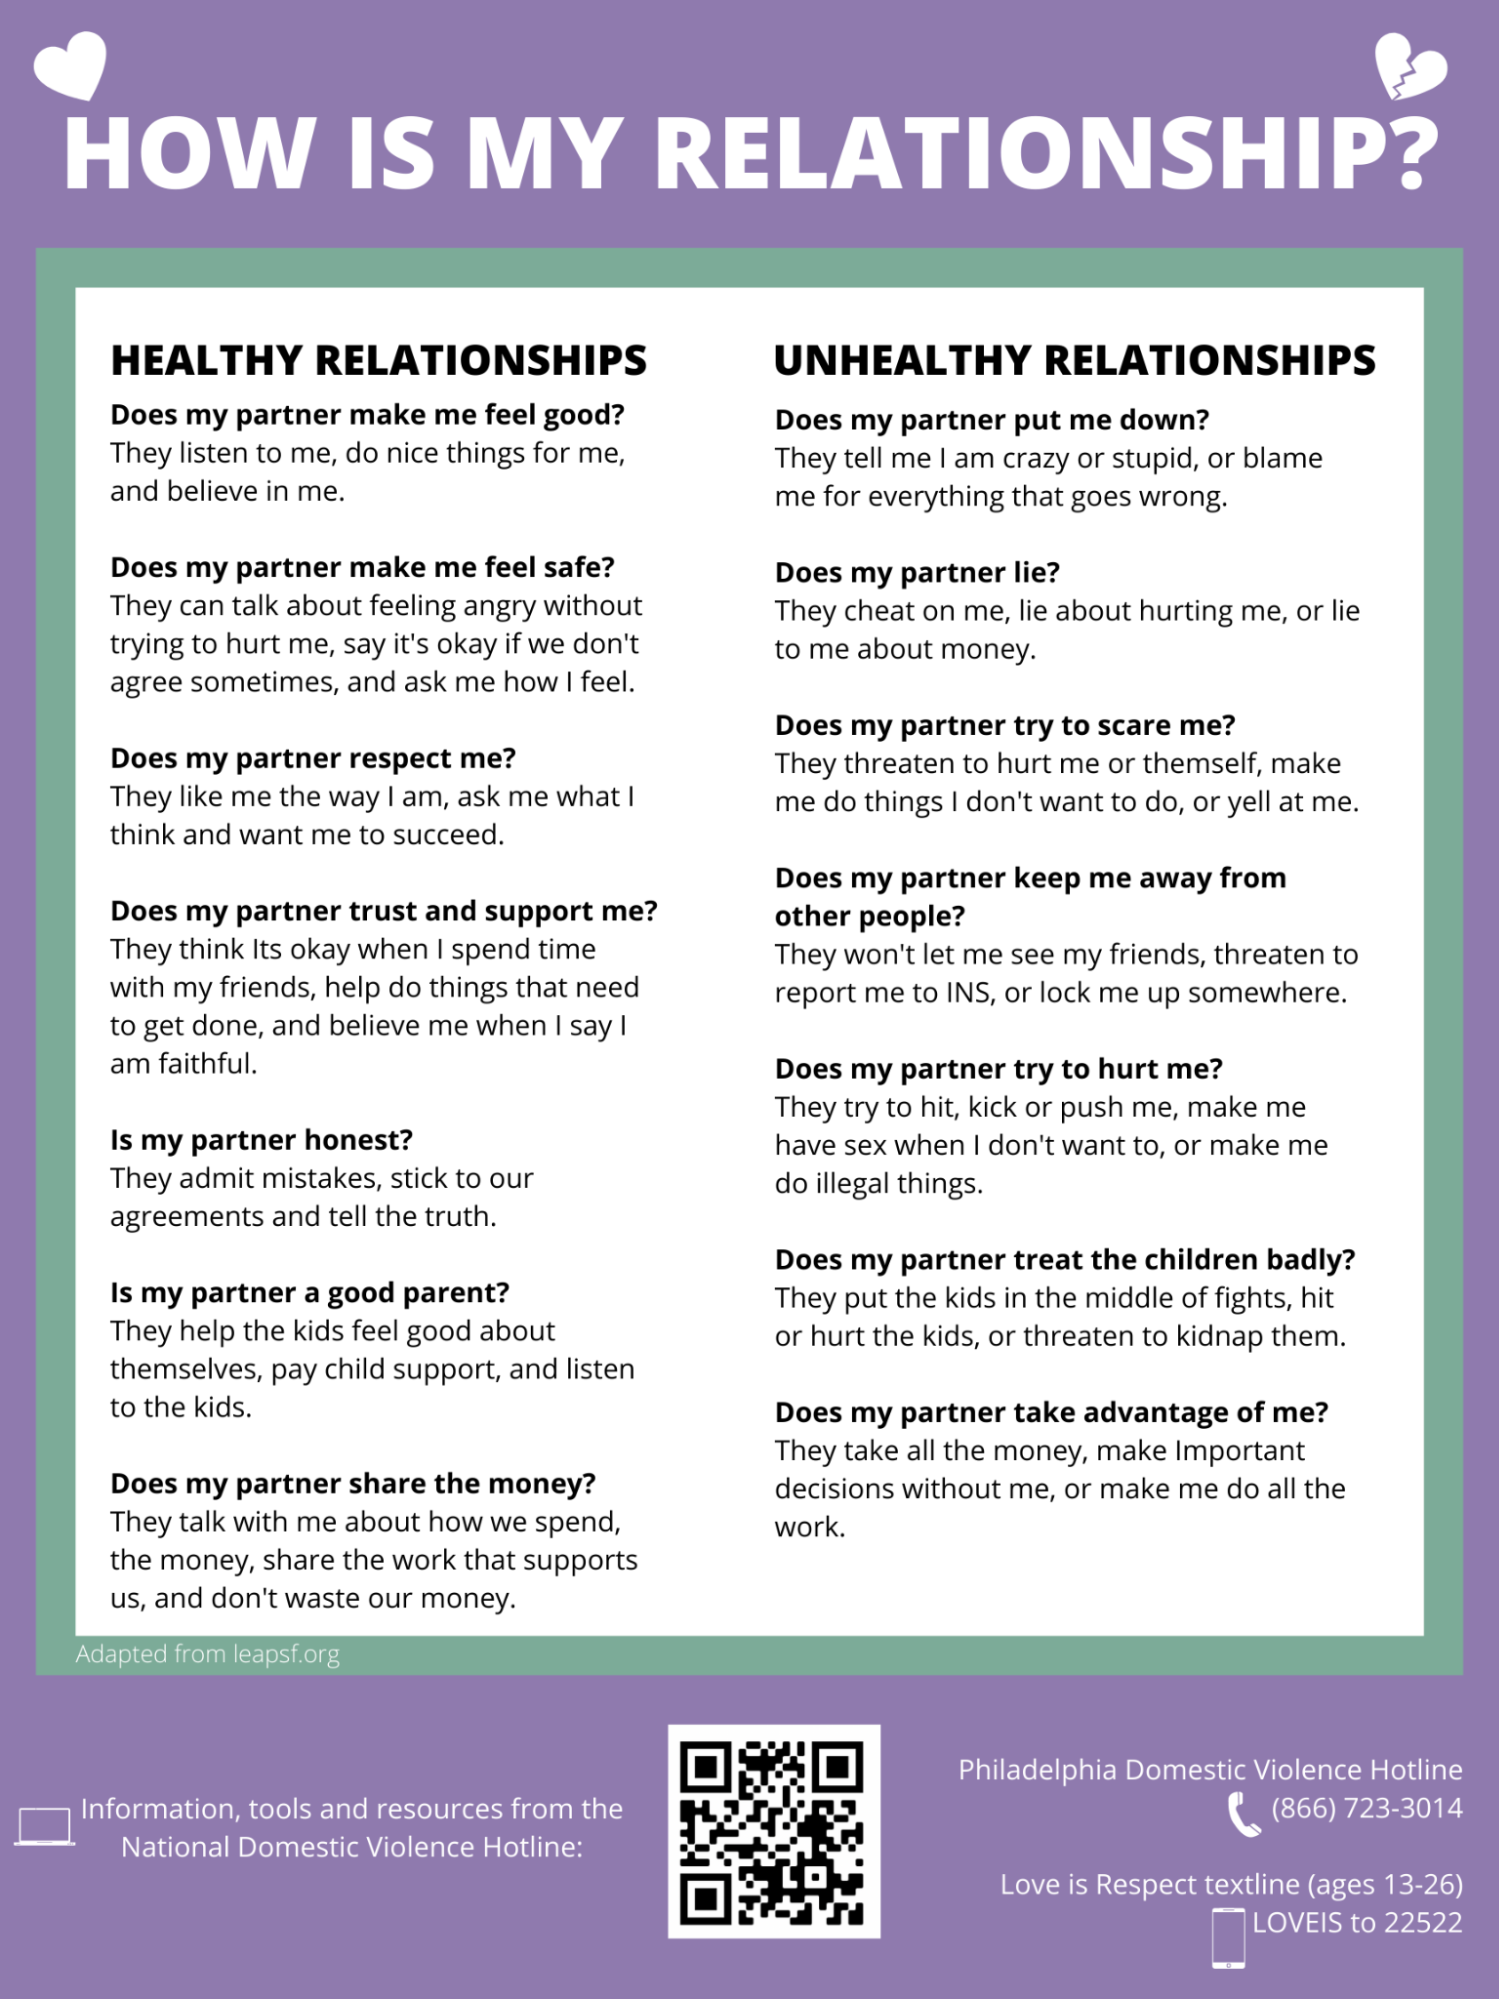 Dating and Healthy Relationships photo pic